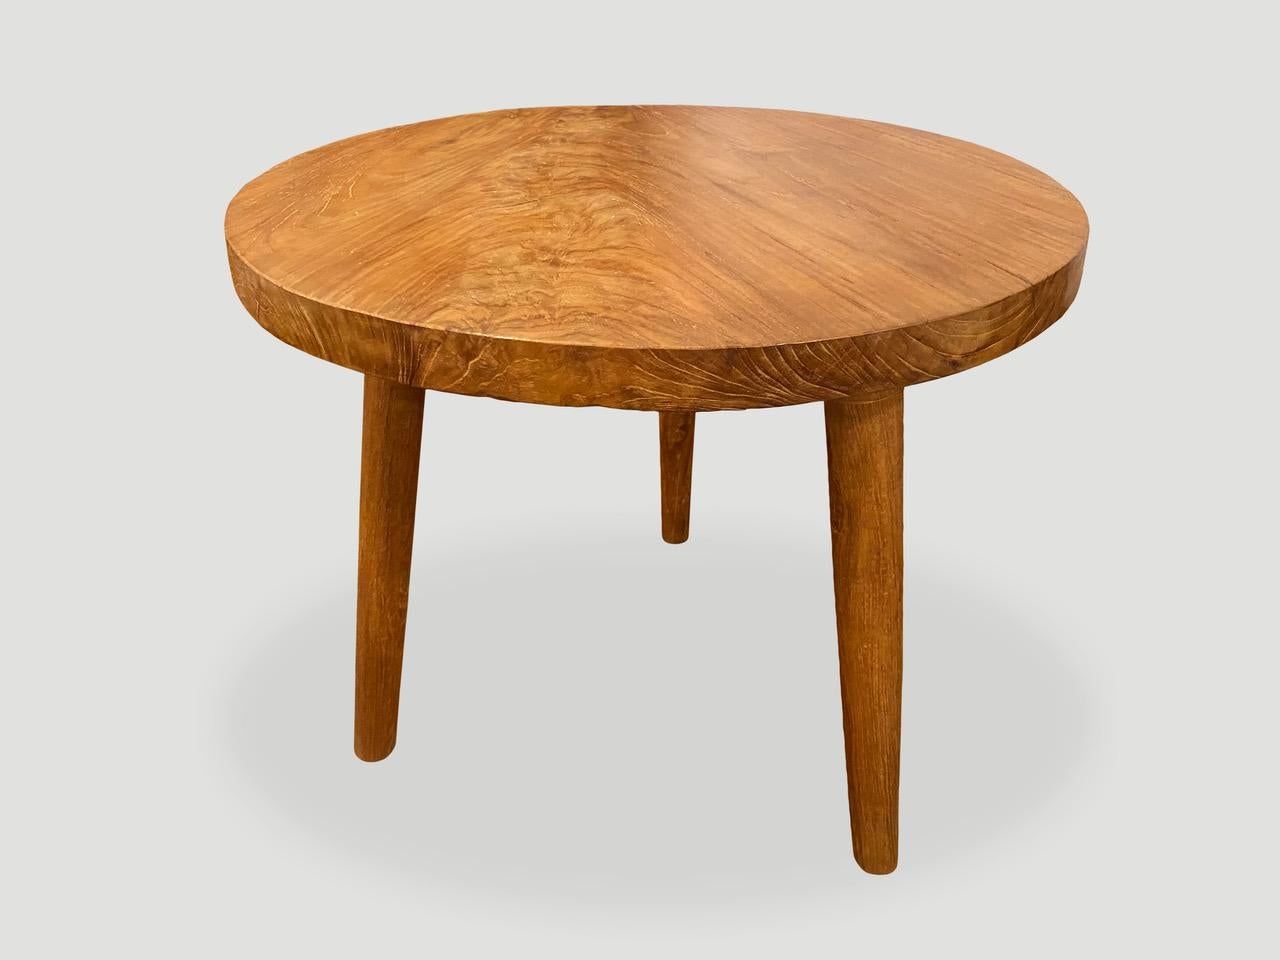 Single slab reclaimed teak wood side table with a natural oil finish revealing the beautiful grain in the wood. Floating on mid century style legs.

Own an Andrianna Shamaris original.

Andrianna Shamaris. The Leader In Modern Organic Design.